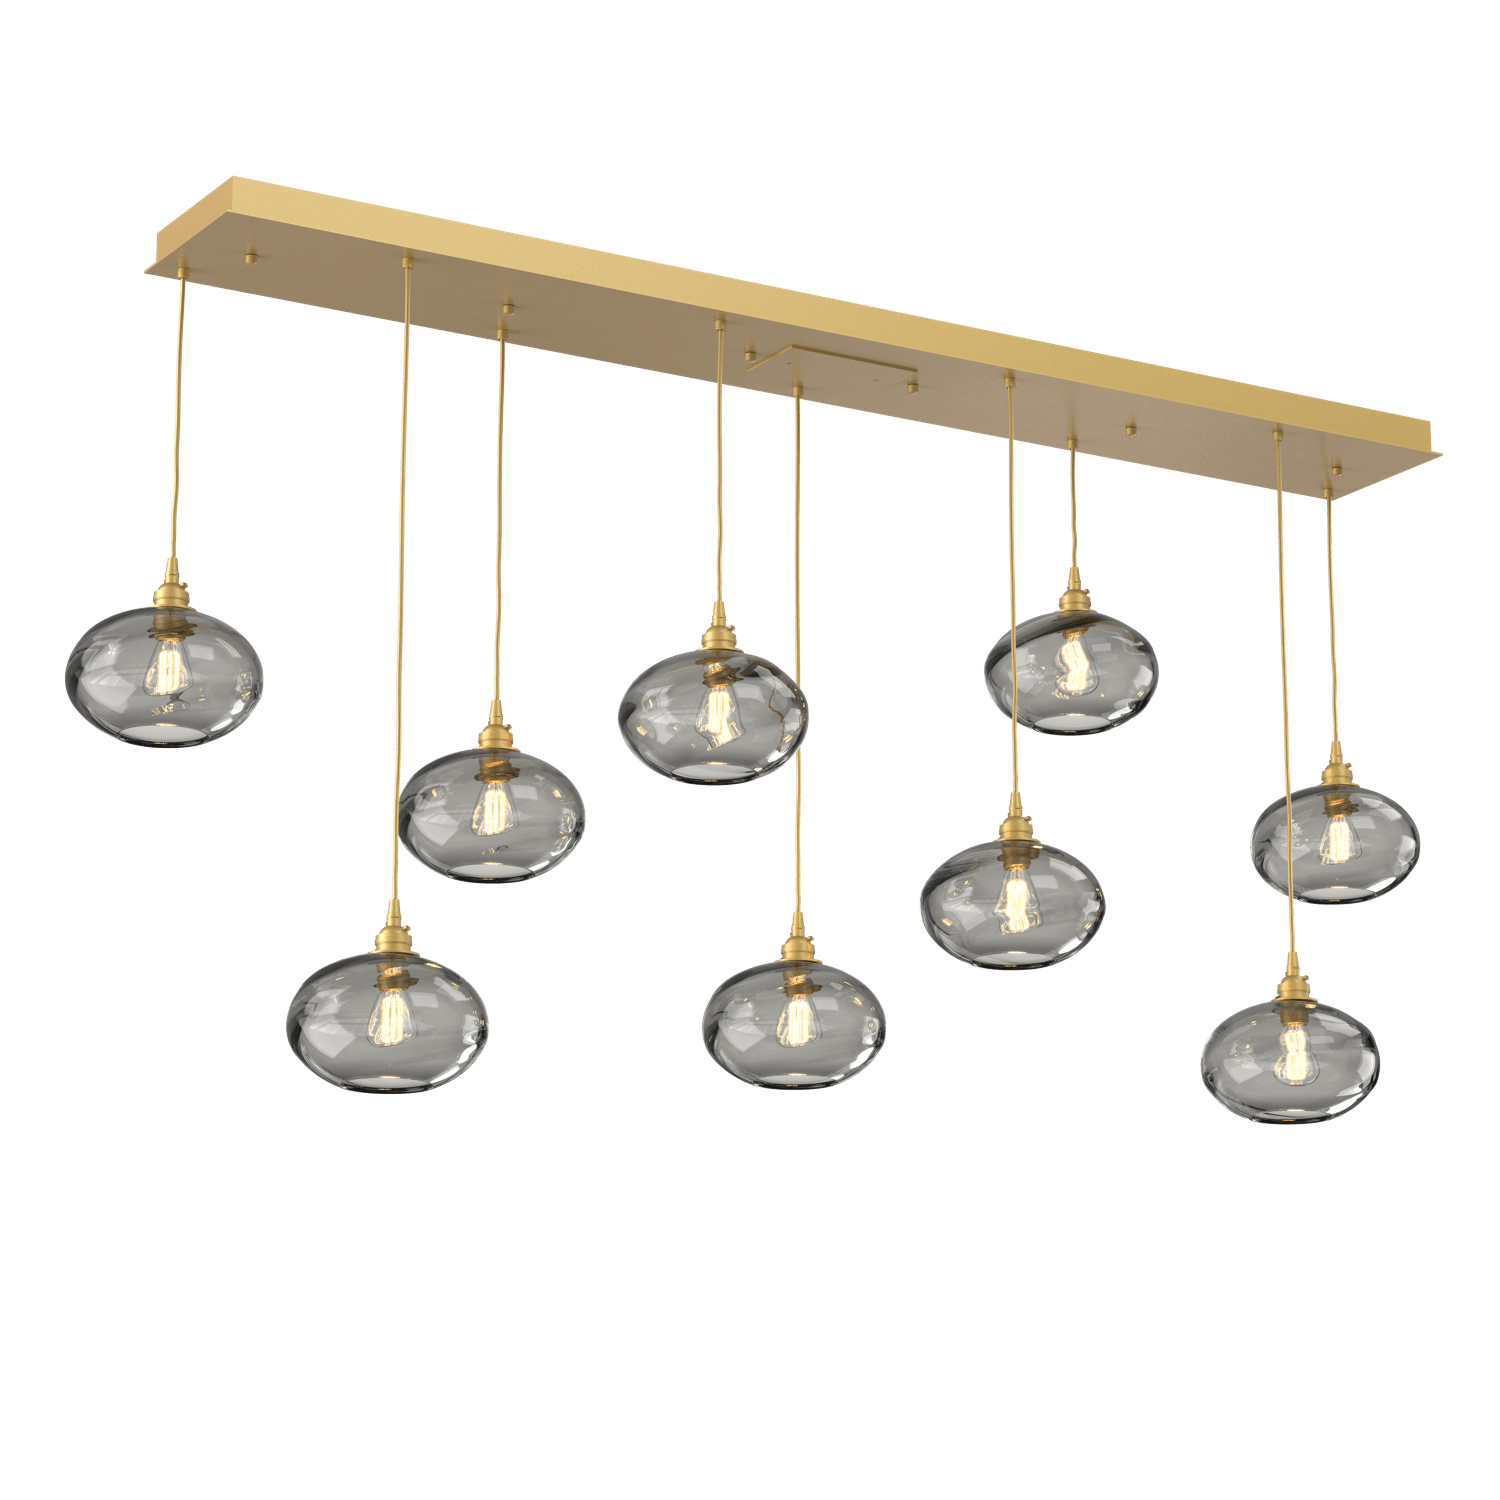 PLB0036-09-GB-OS-Hammerton-Studio-Optic-Blown-Glass-Coppa-9-light-linear-pendant-chandelier-with-gilded-brass-finish-and-optic-smoke-blown-glass-shades-and-incandescent-lamping